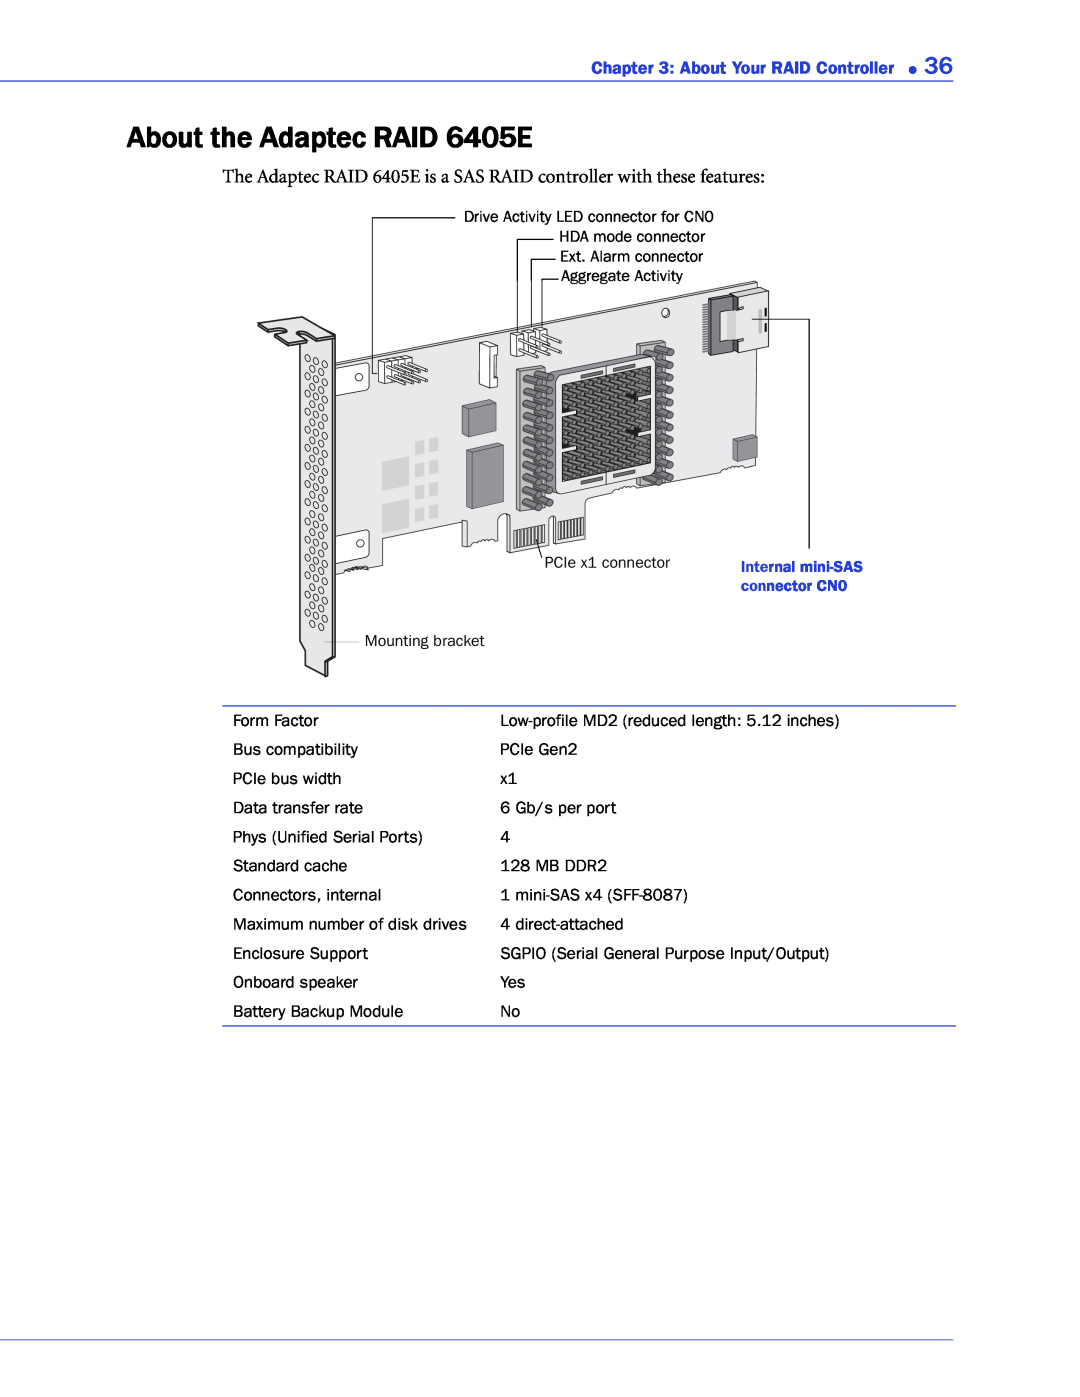 Adaptec 2268300R manual About the Adaptec RAID 6405E, The Adaptec RAID 6405E is a SAS RAID controller with these features 